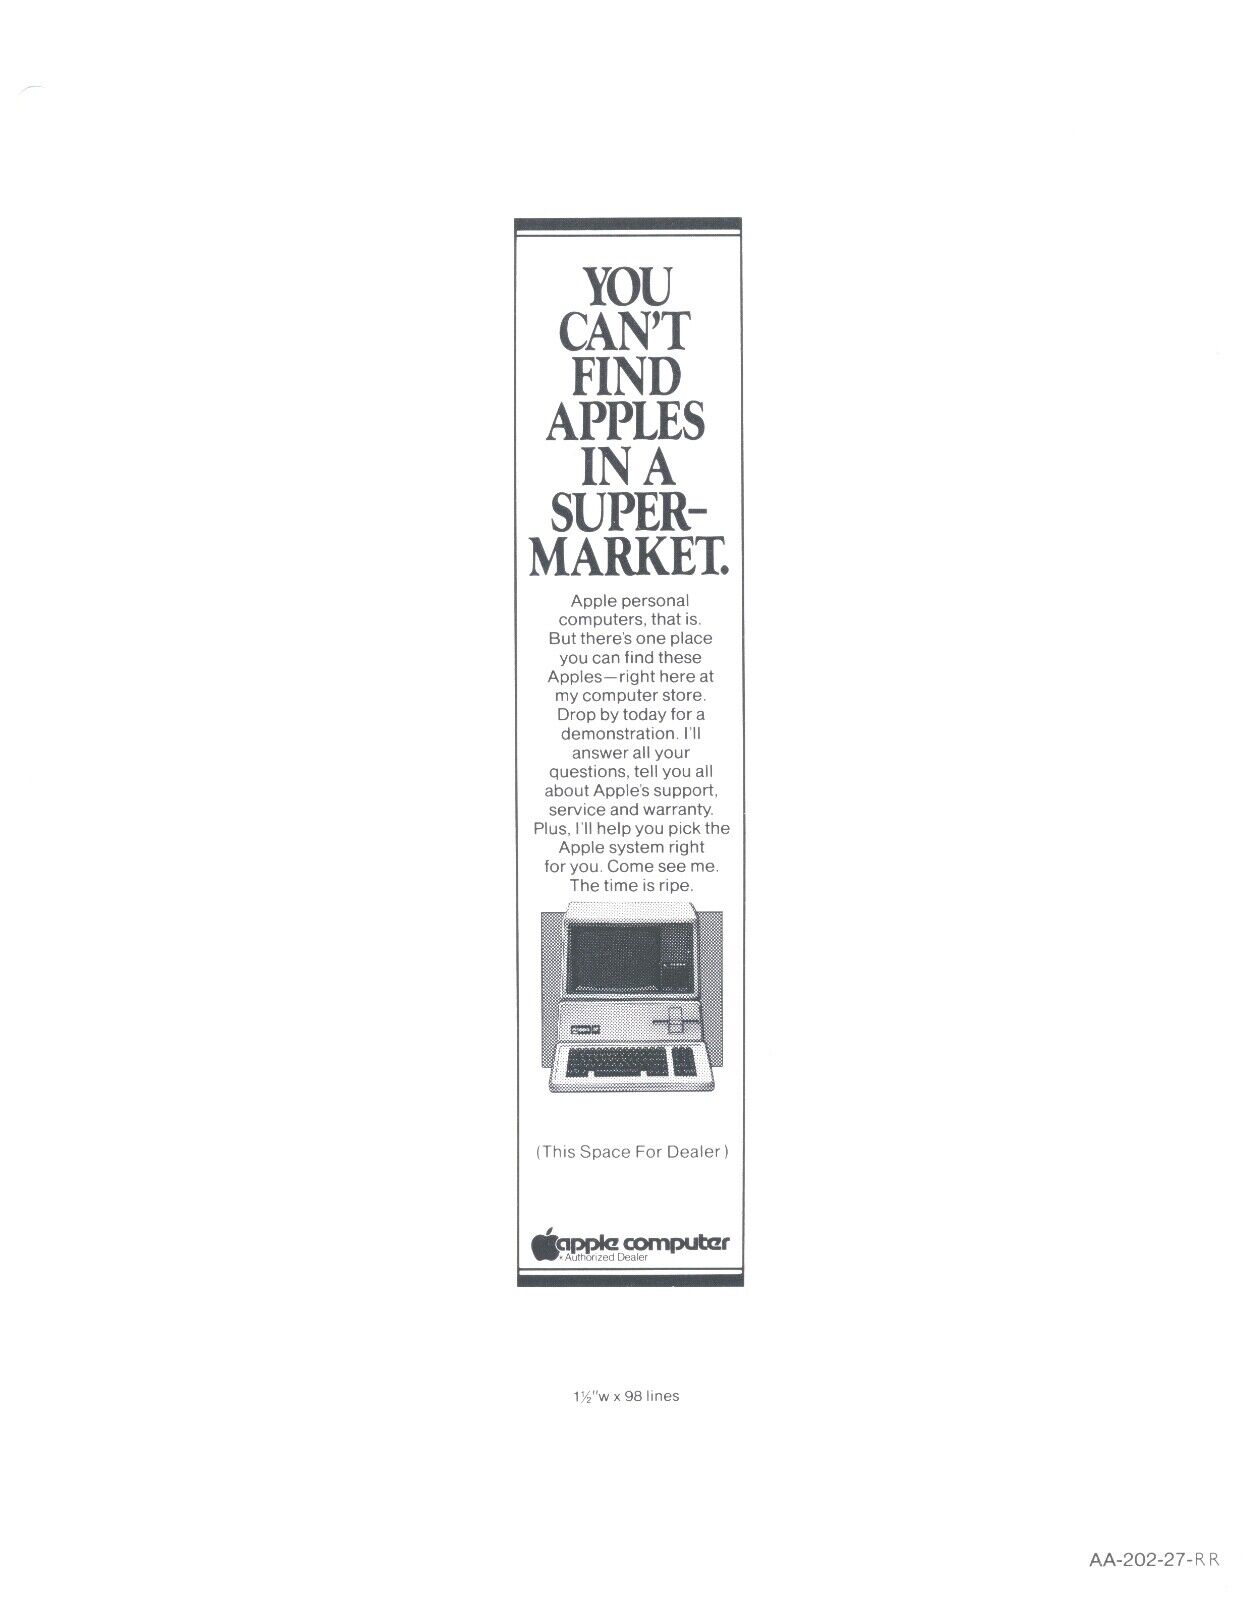 Original Apple Advertising Copy for Papers & Mags #3 -NO Apples in a Supermarket